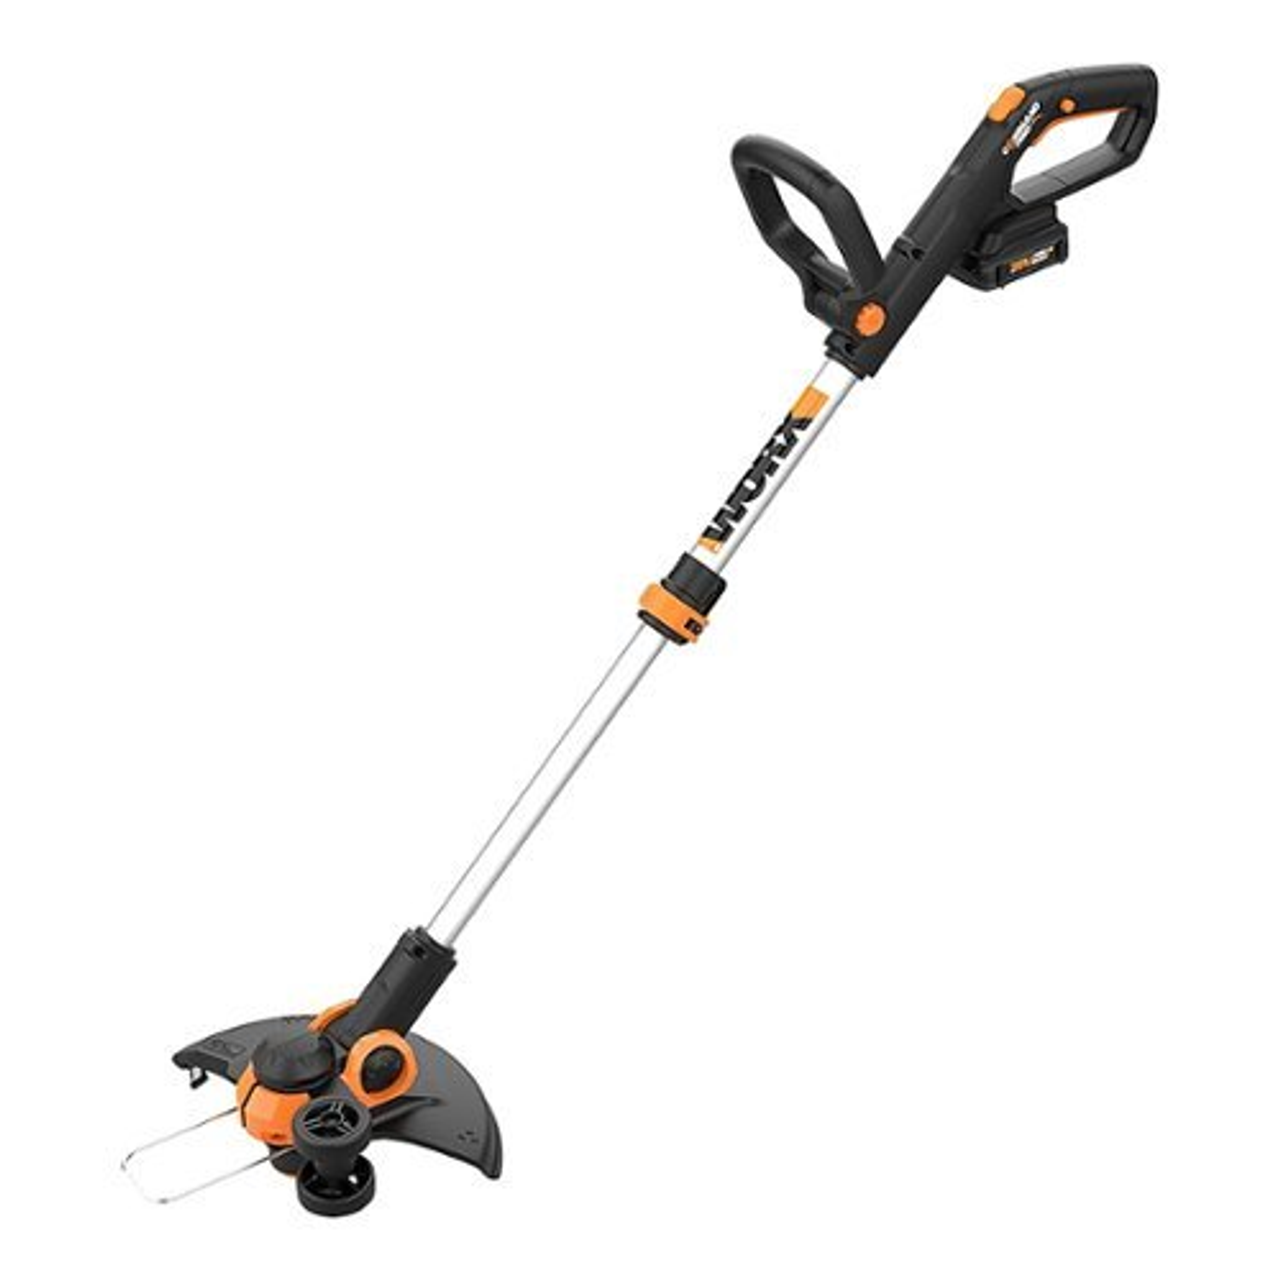 Worx WG163.8 20V Power Share GT 3.0 12" Cordless String Trimmer & Edger (Battery and Charger Included) - Black